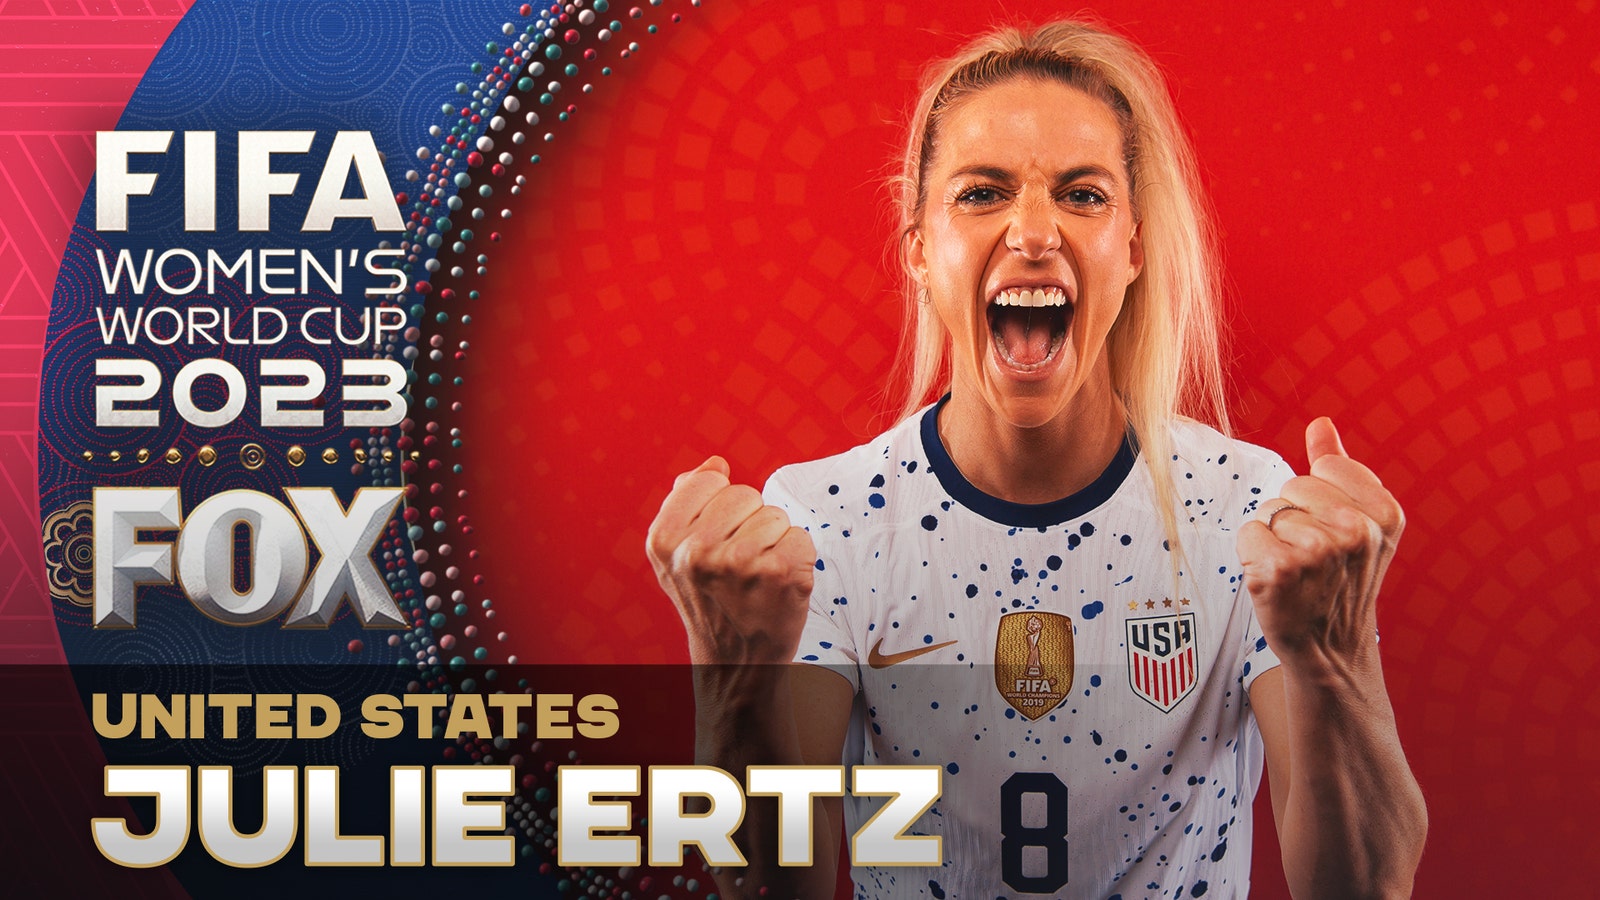 How crucial of role will Julie Ertz play for USWNT?